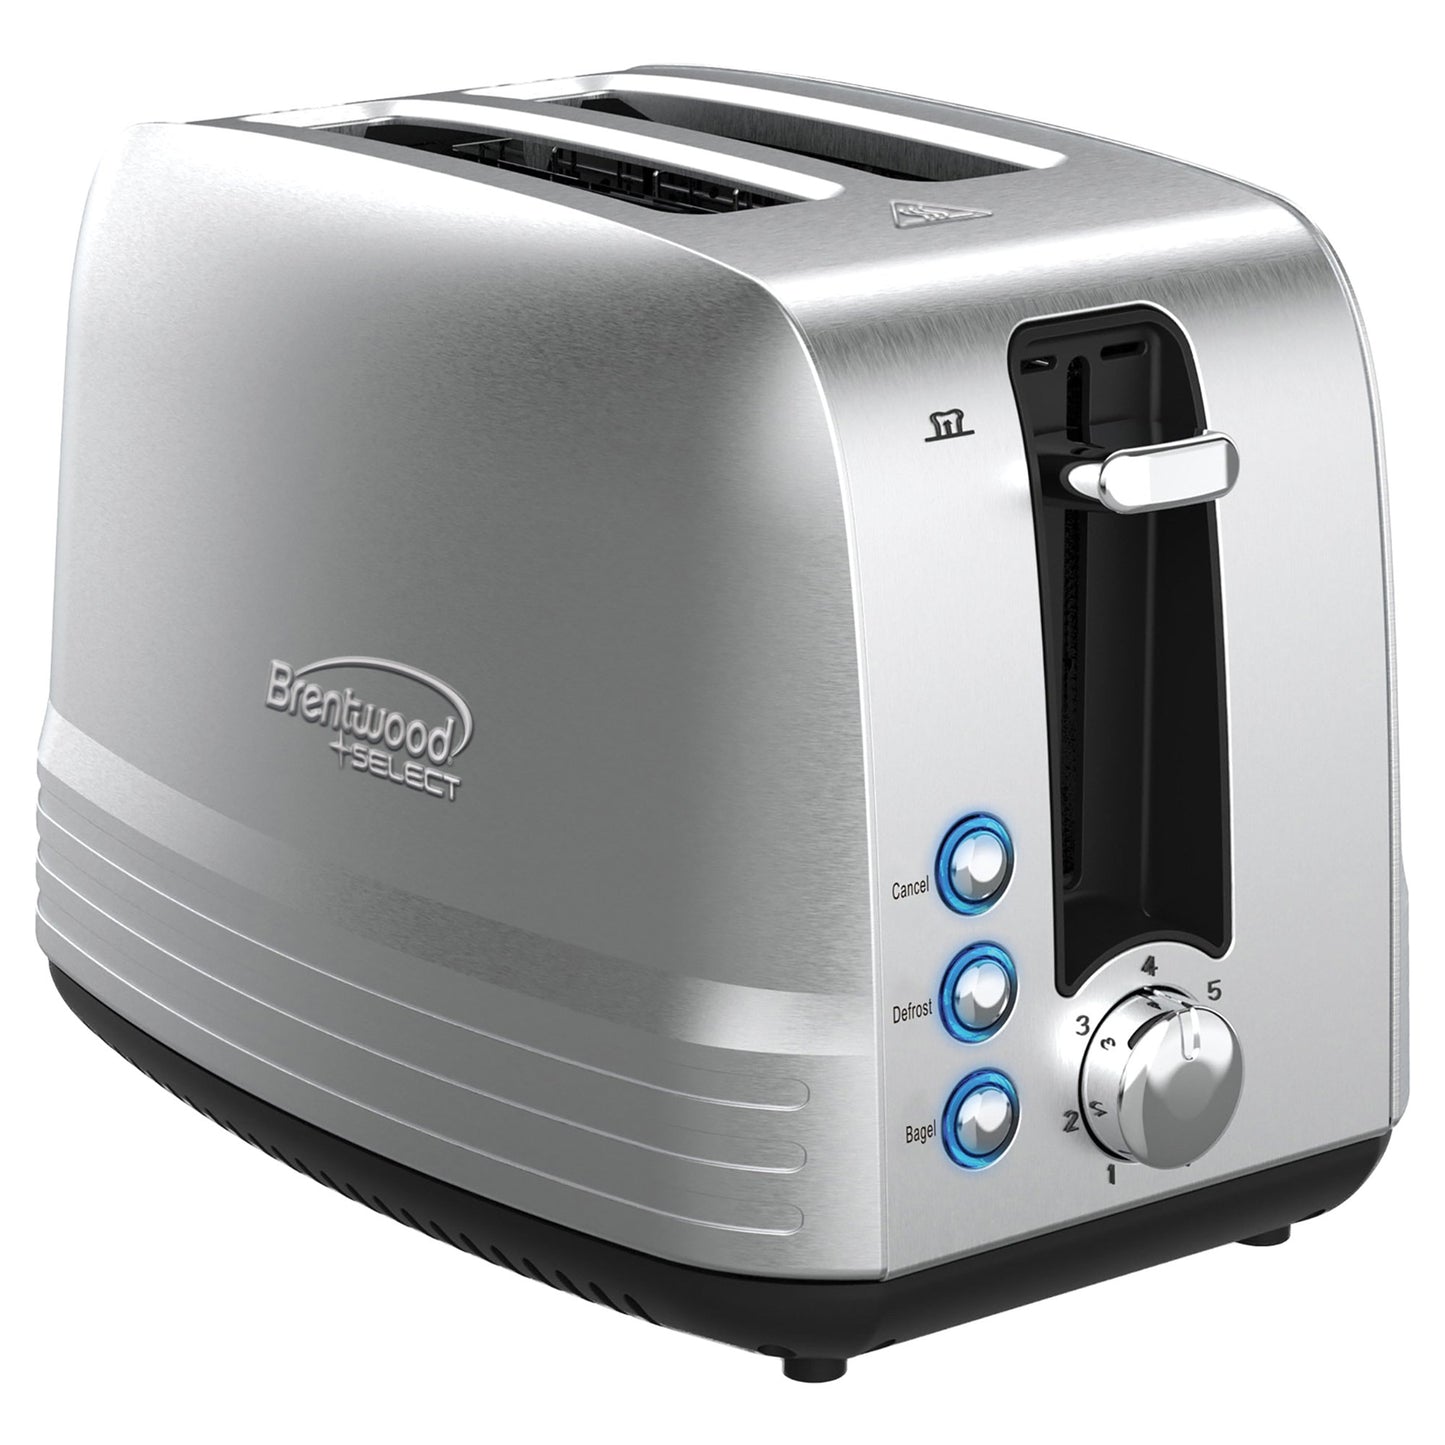 Brentwood Appliances TS-227S 850W Extra-Wide Slot 2-Slice S-Steel Toaster